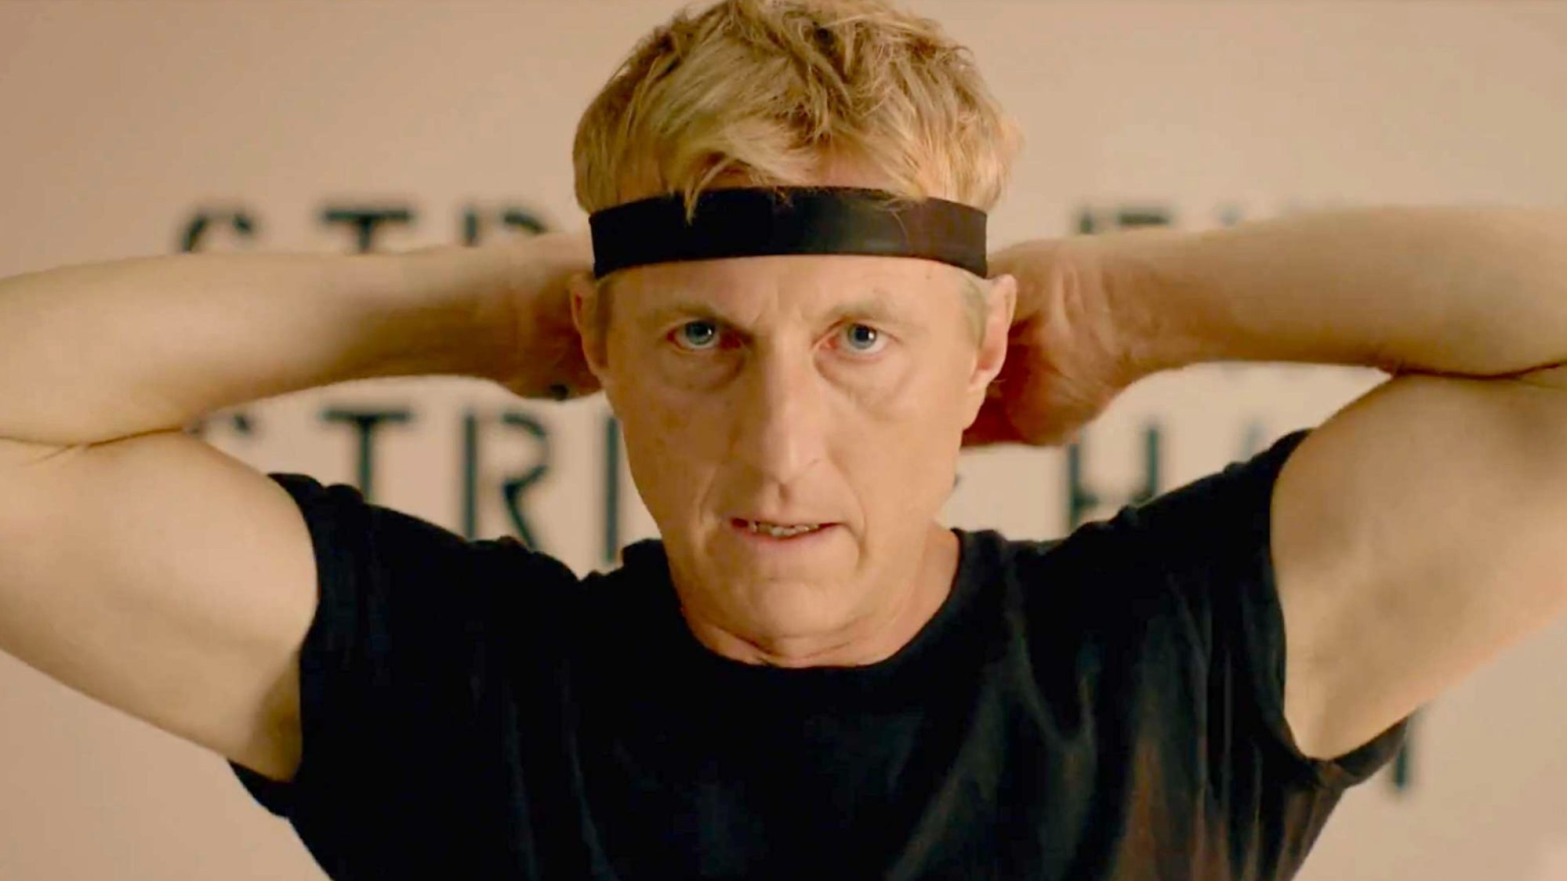 Johnny Lawrence, getting ready to karate.  (Image: Netflix)